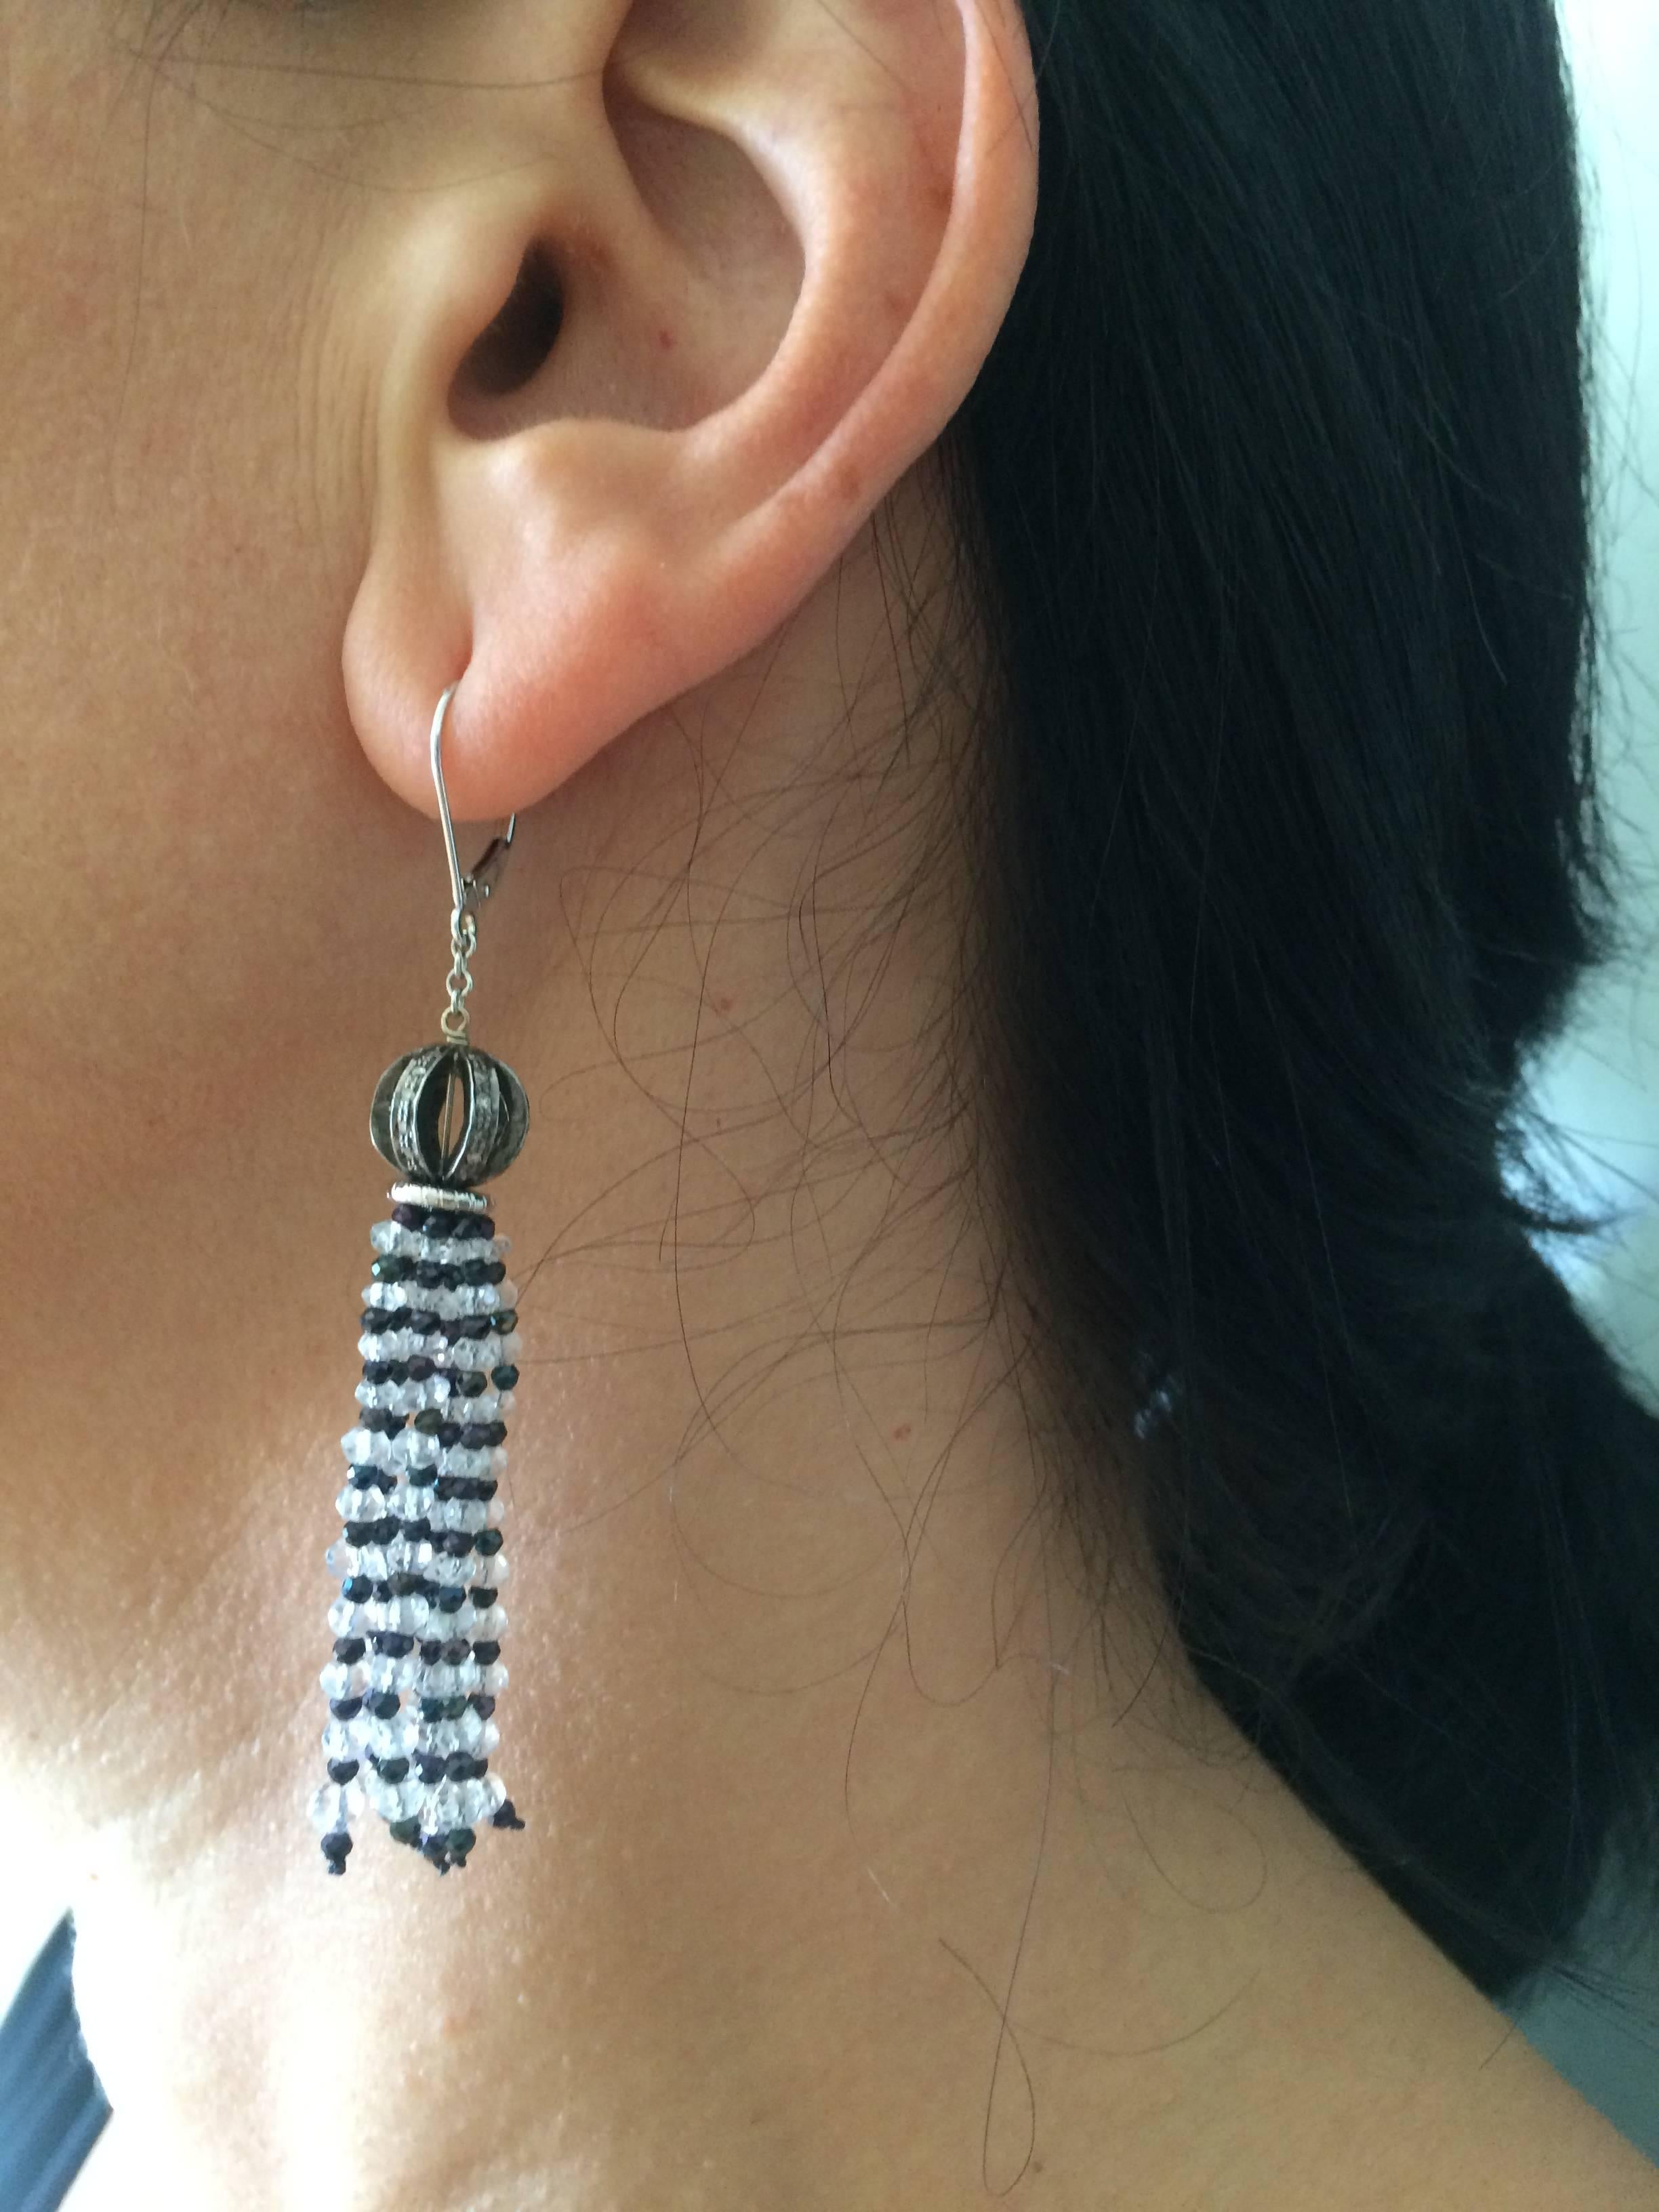 Diamond Encrusted Ball Earrings with Quartz and Black Spinel Tassels by Marina J 1